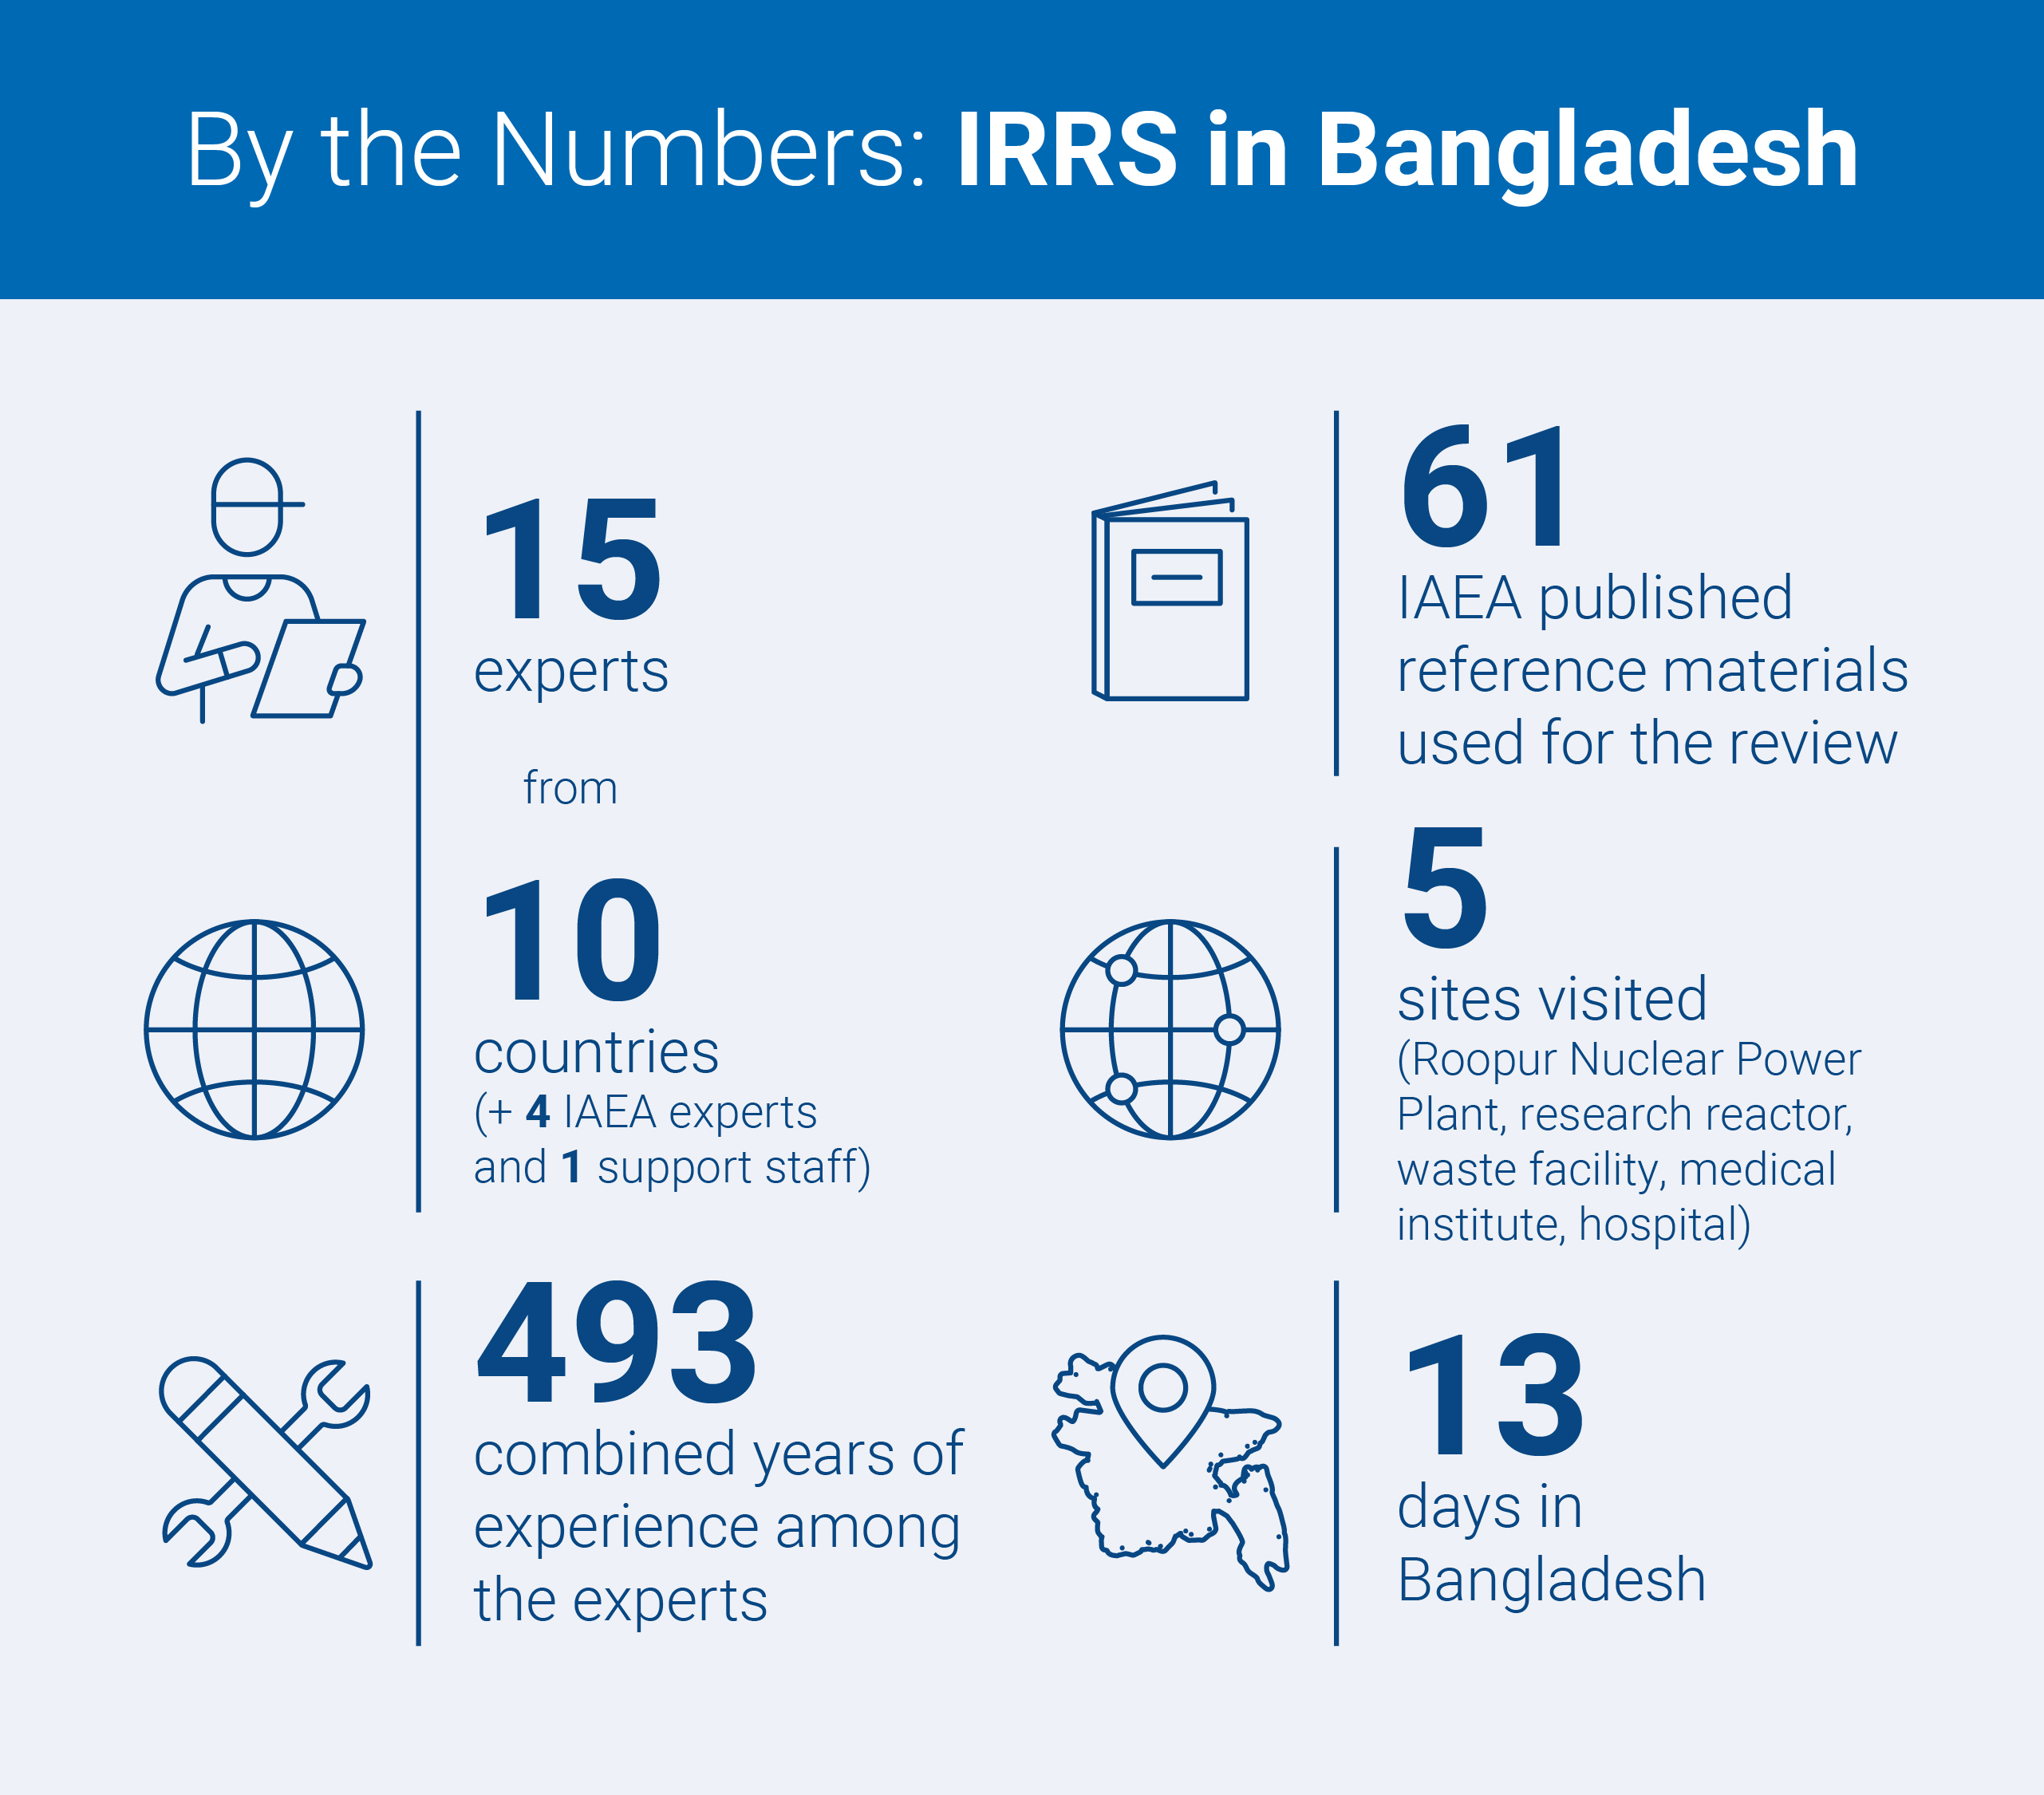 IRRS in Bangladesh by the numbers